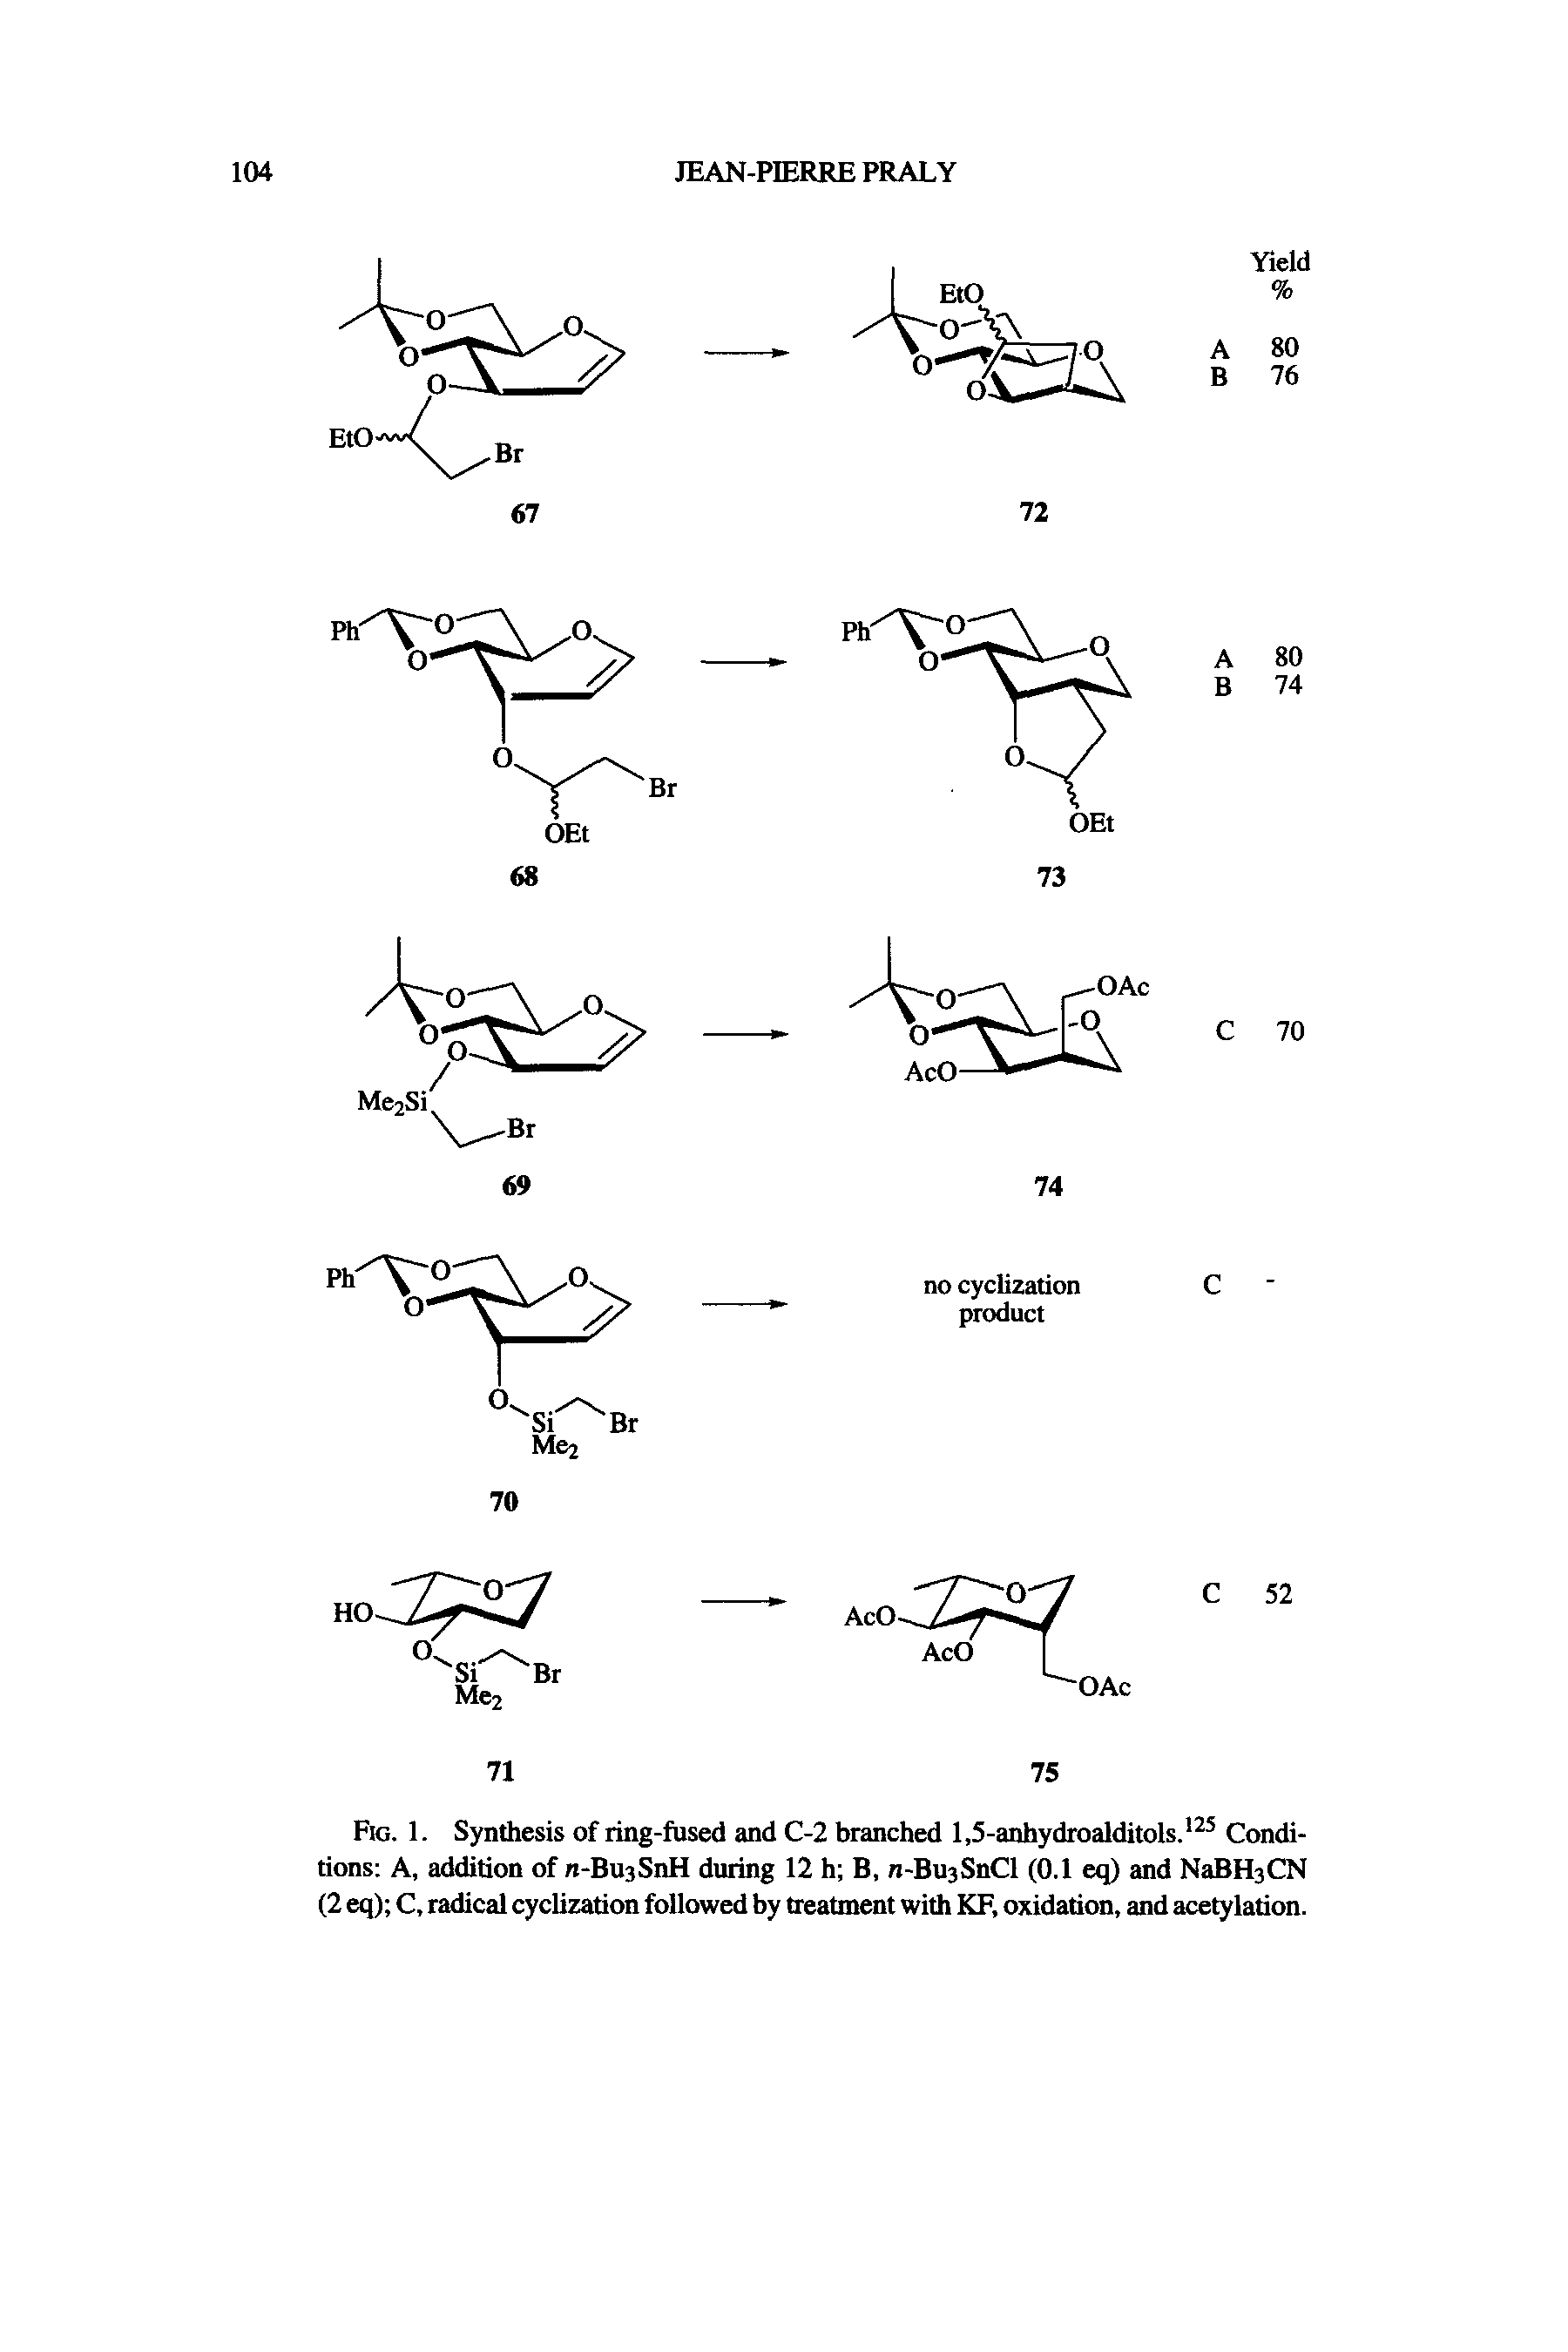 Fig. 1. Synthesis of ring-fused and C-2 branched 1,5-anhydroalditols.125 Conditions A, addition of n-BujSnH during 12 h B, n-Bu3SnCl (0.1 eq) and NaBH3CN (2 eq) C, radical cyclization followed by treatment with KF, oxidation, and acetylation.